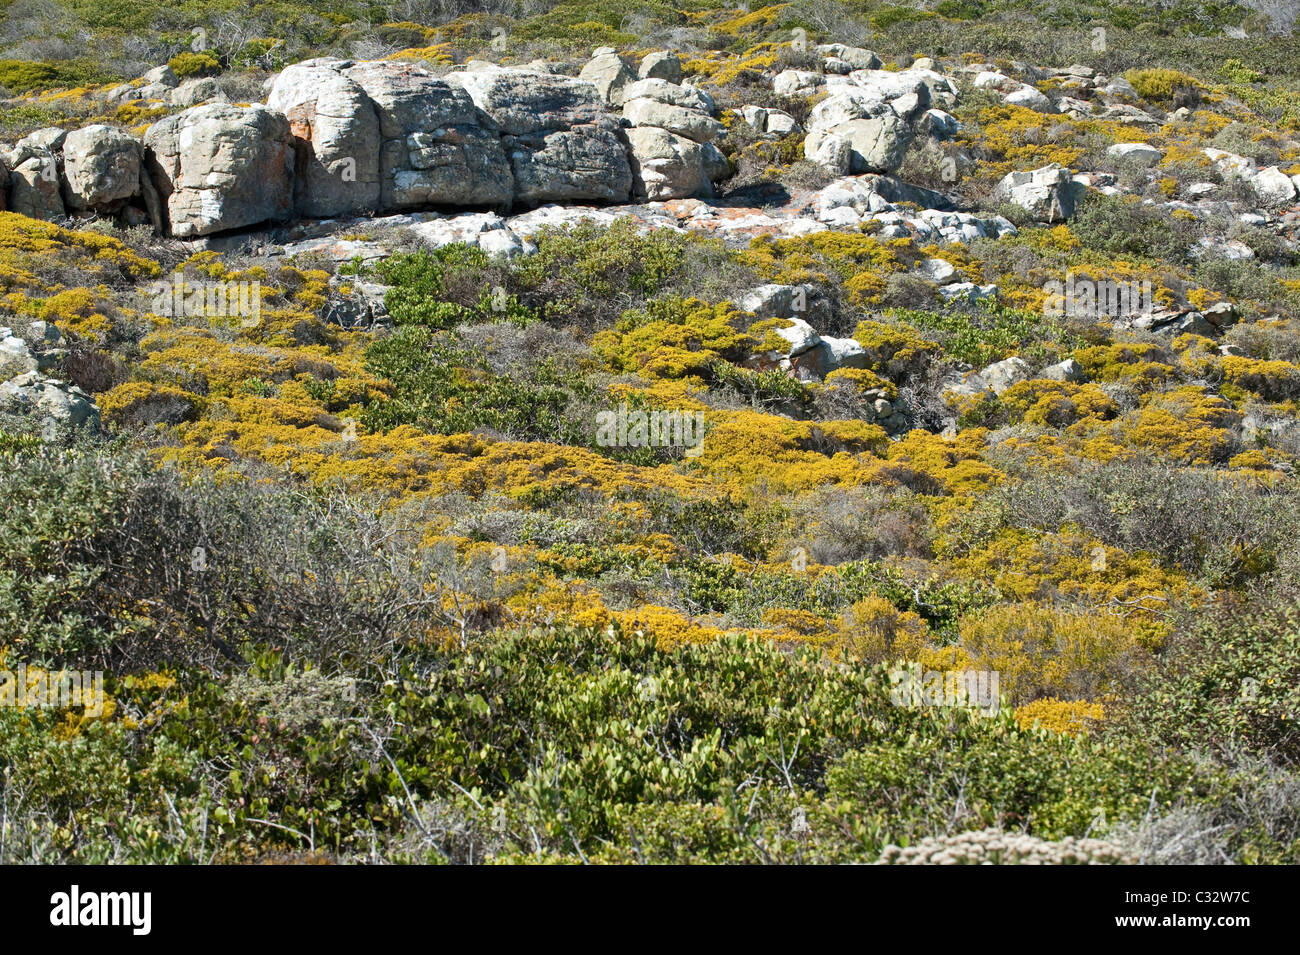 Boulders among flowering fynbos Kogelberg Nature Reserve Table Mountain National Park Cape Peninsula Western Cape South Africa Stock Photo